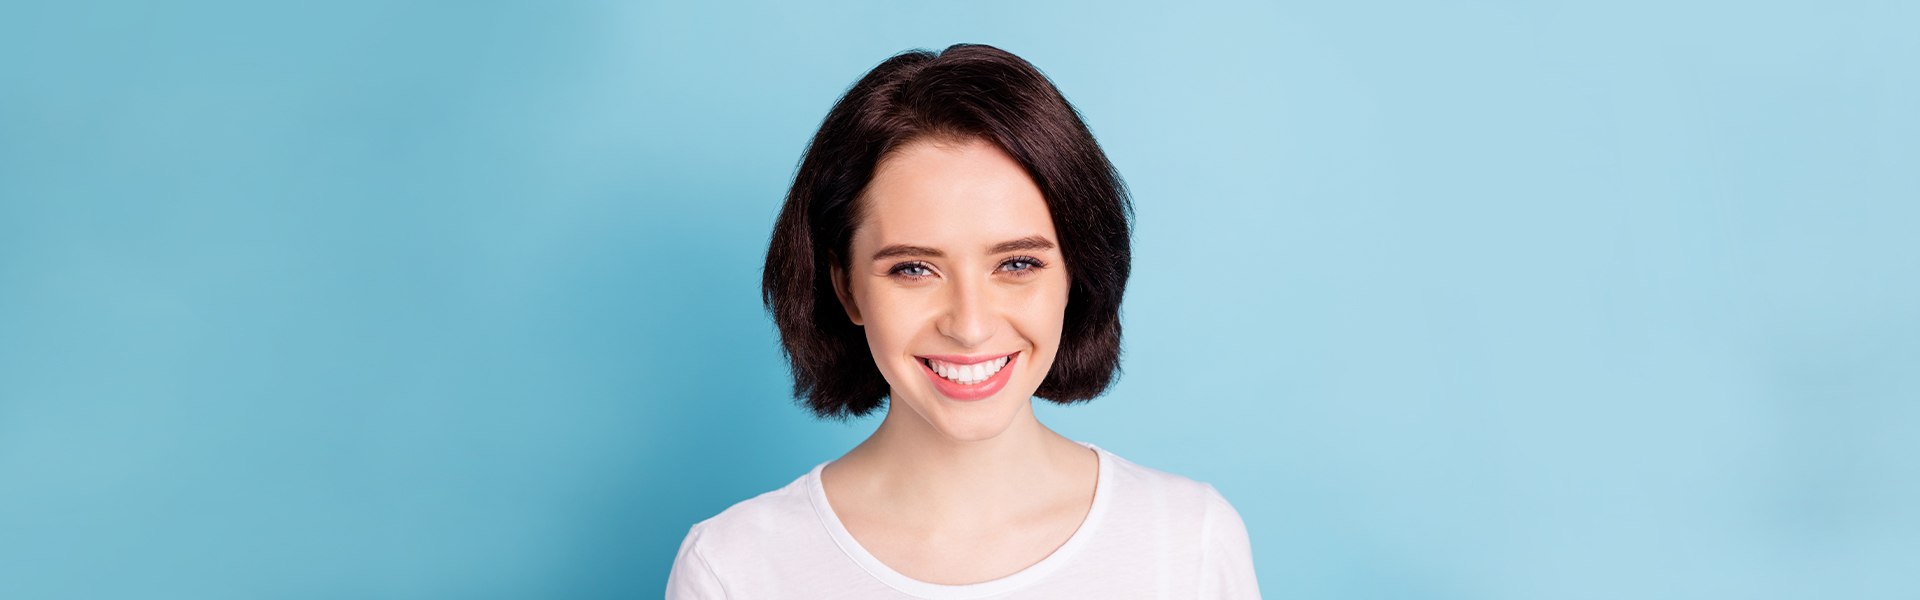 What is Teeth Whitening: Procedure, Types, Cost & Benefits?